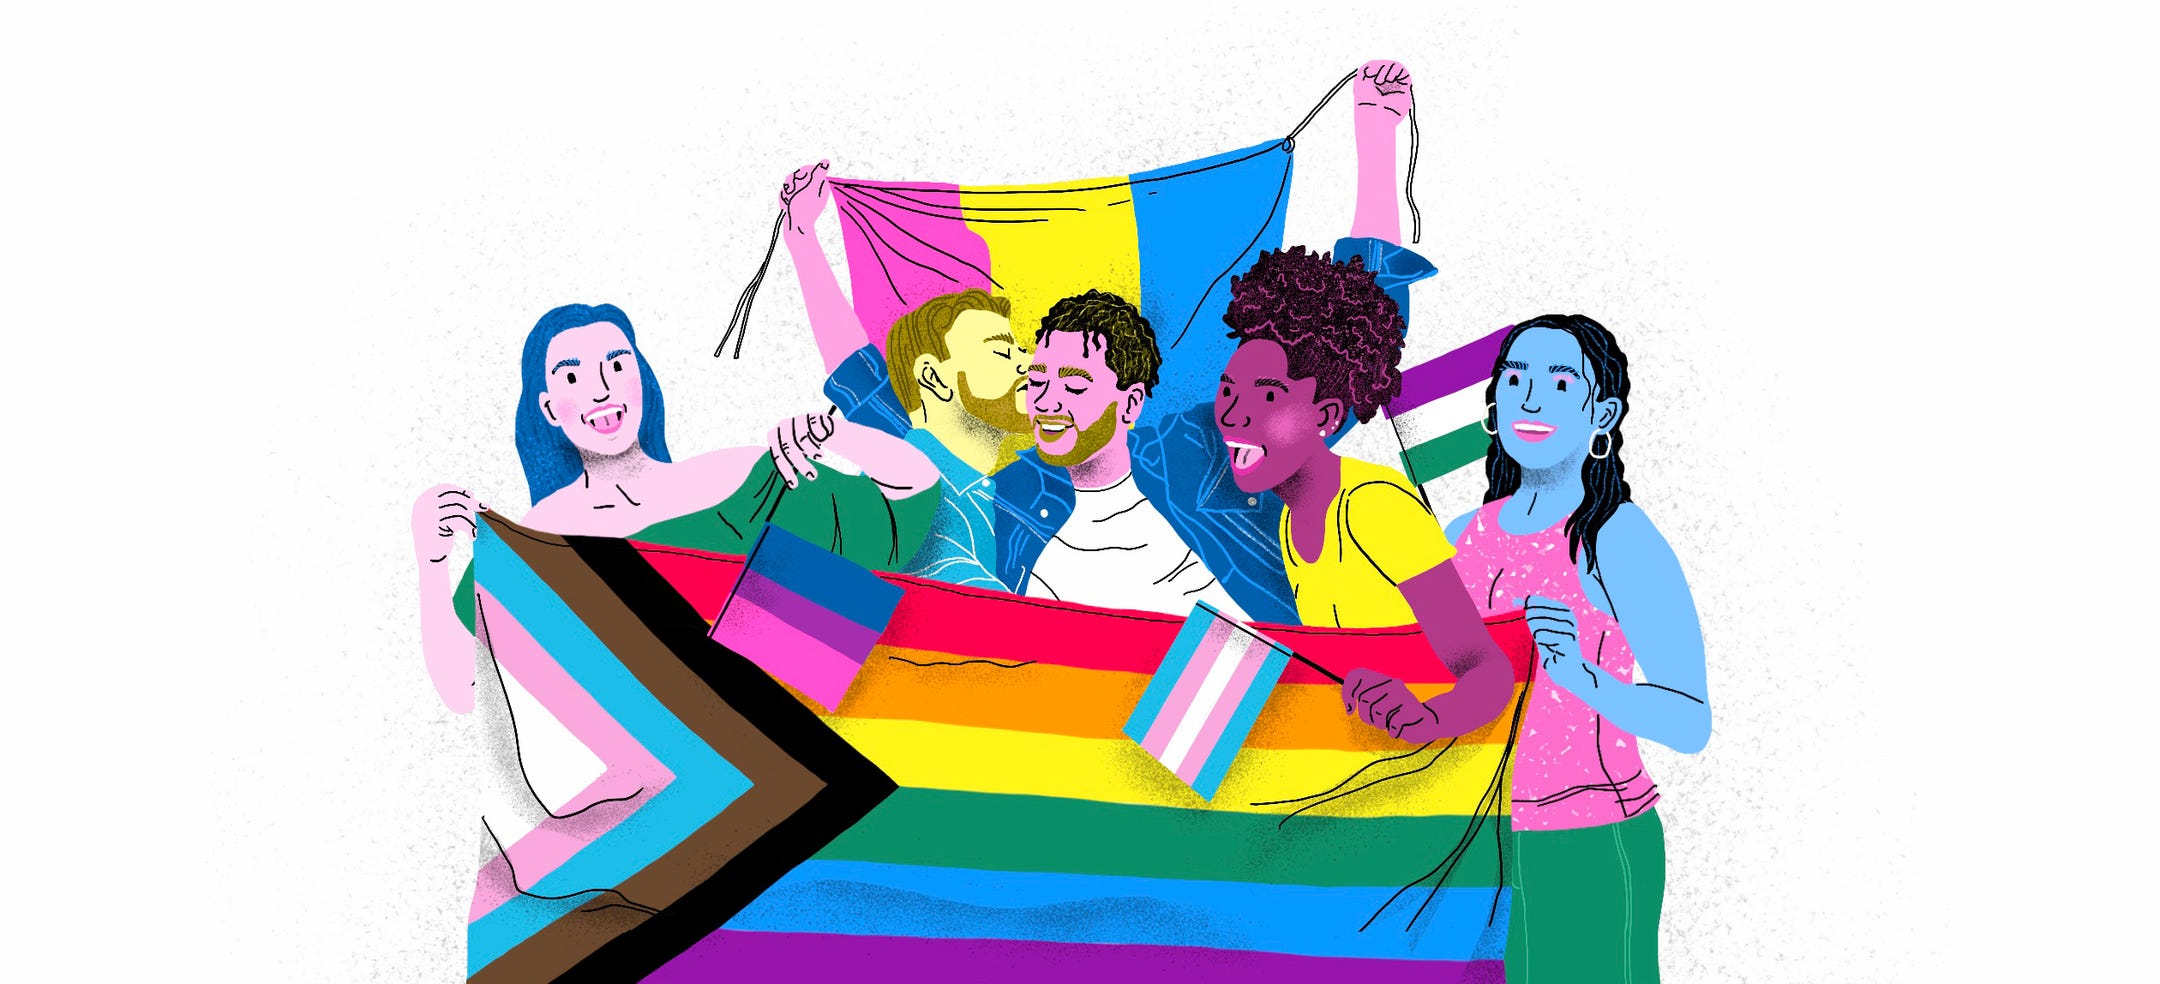 Here's What the Different LGBTQIA+ Flags Represent